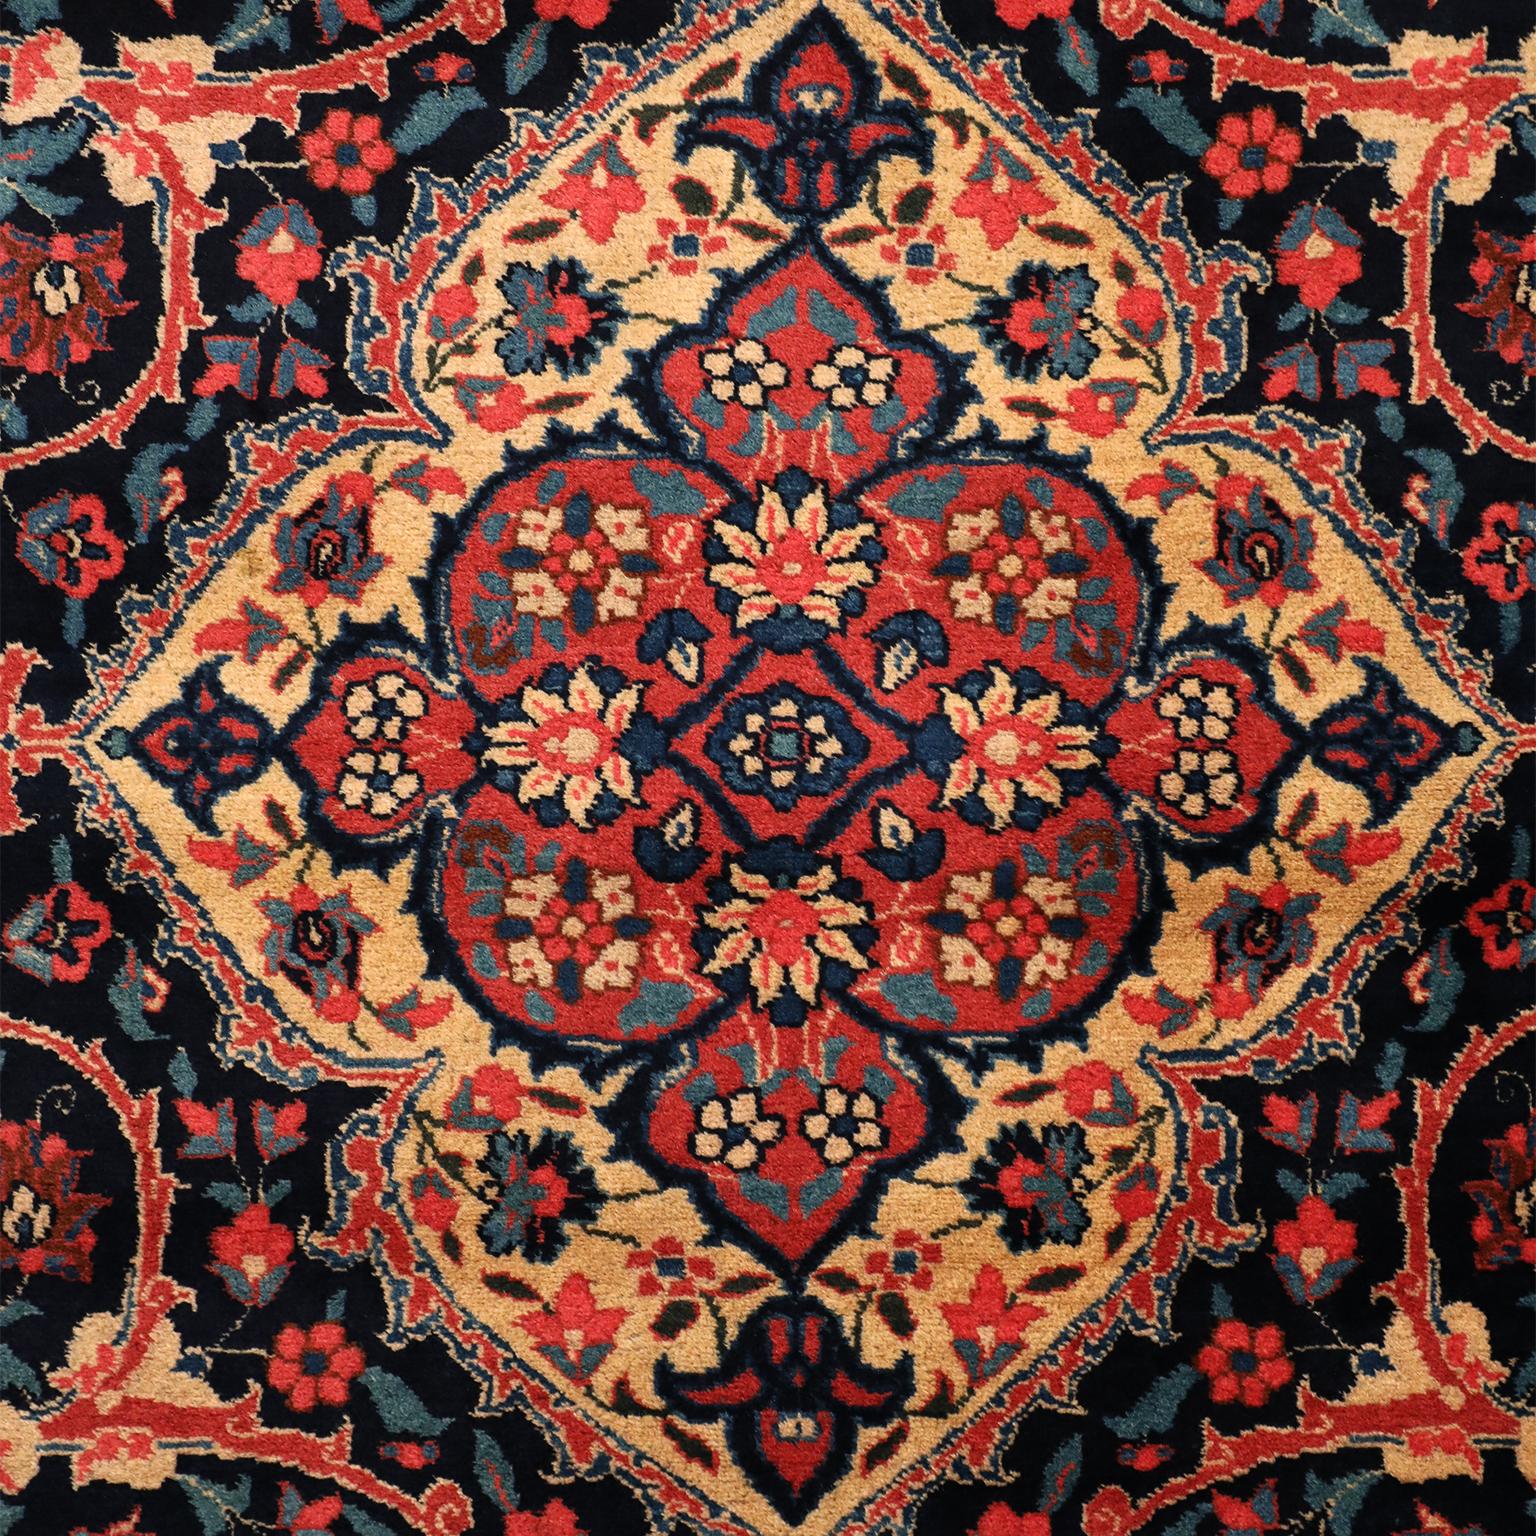 Hand-knotted Antique 1920s Wool Persian Tabriz Rug, Red and Indigo, 11' x 15' In Good Condition For Sale In New York, NY